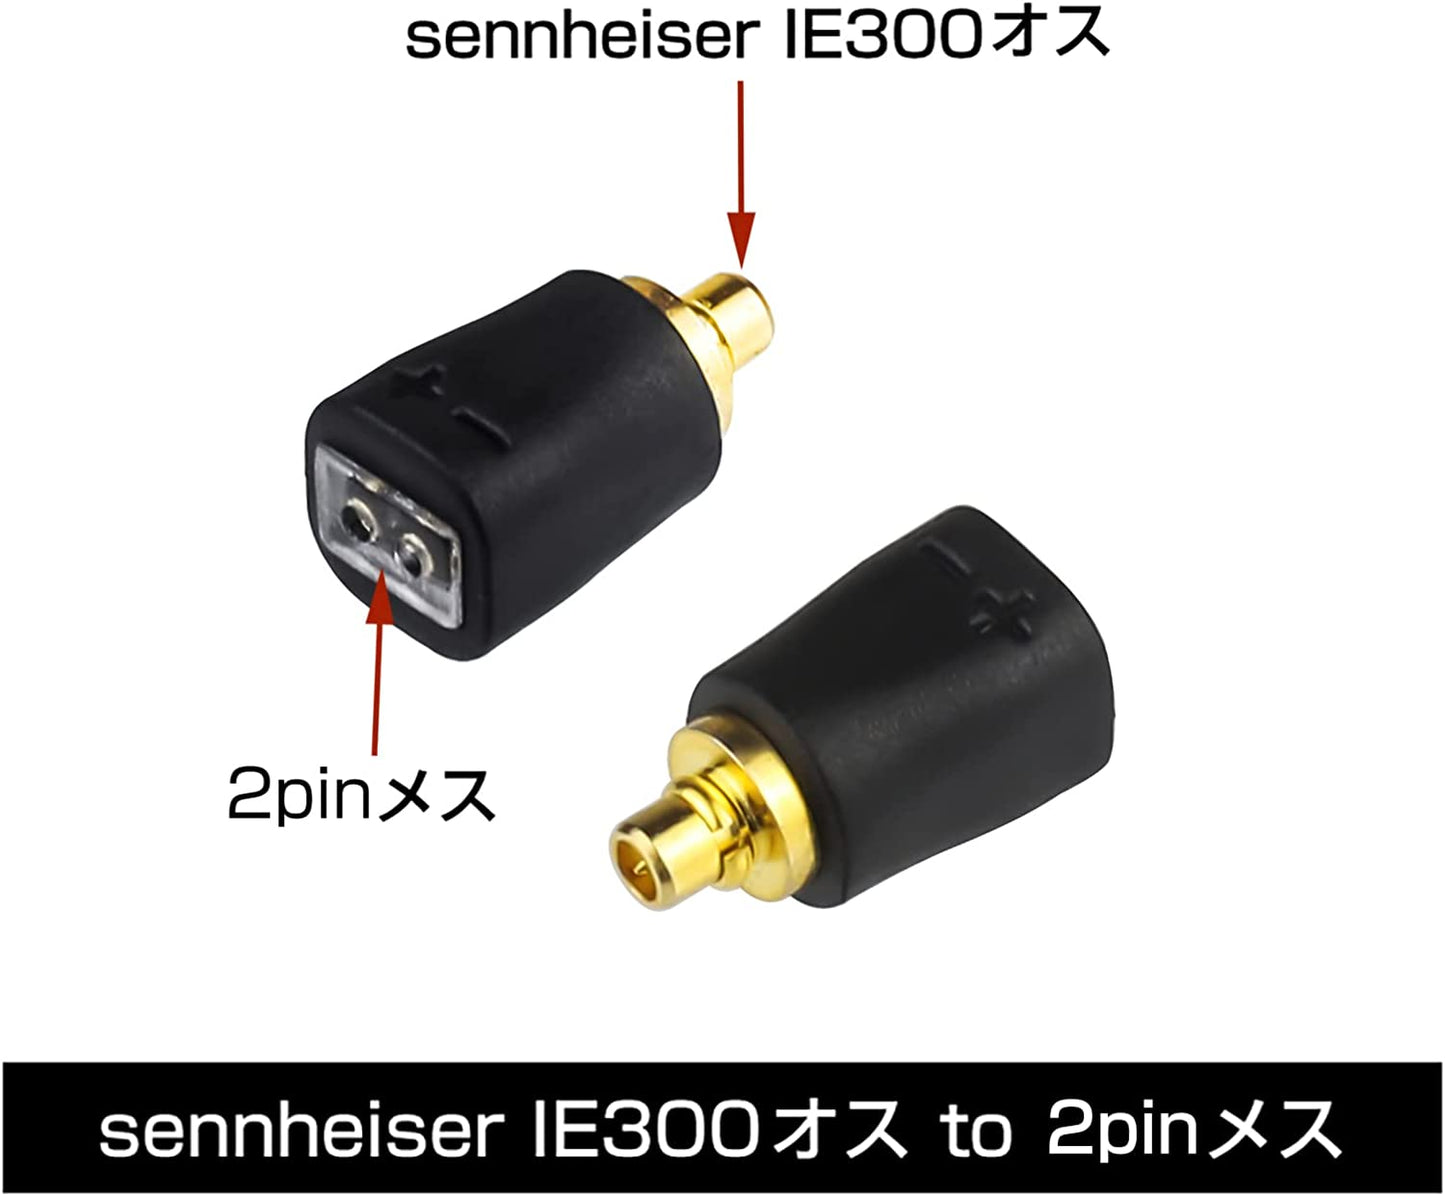 IE300-2Pin 変換コネクター コネクターキット ゼンハイザー用 IE300/900用（オス） - 2Pinコネクタ 0.78mm（メス） IE300・IE600・IE900に適合する 2個セット